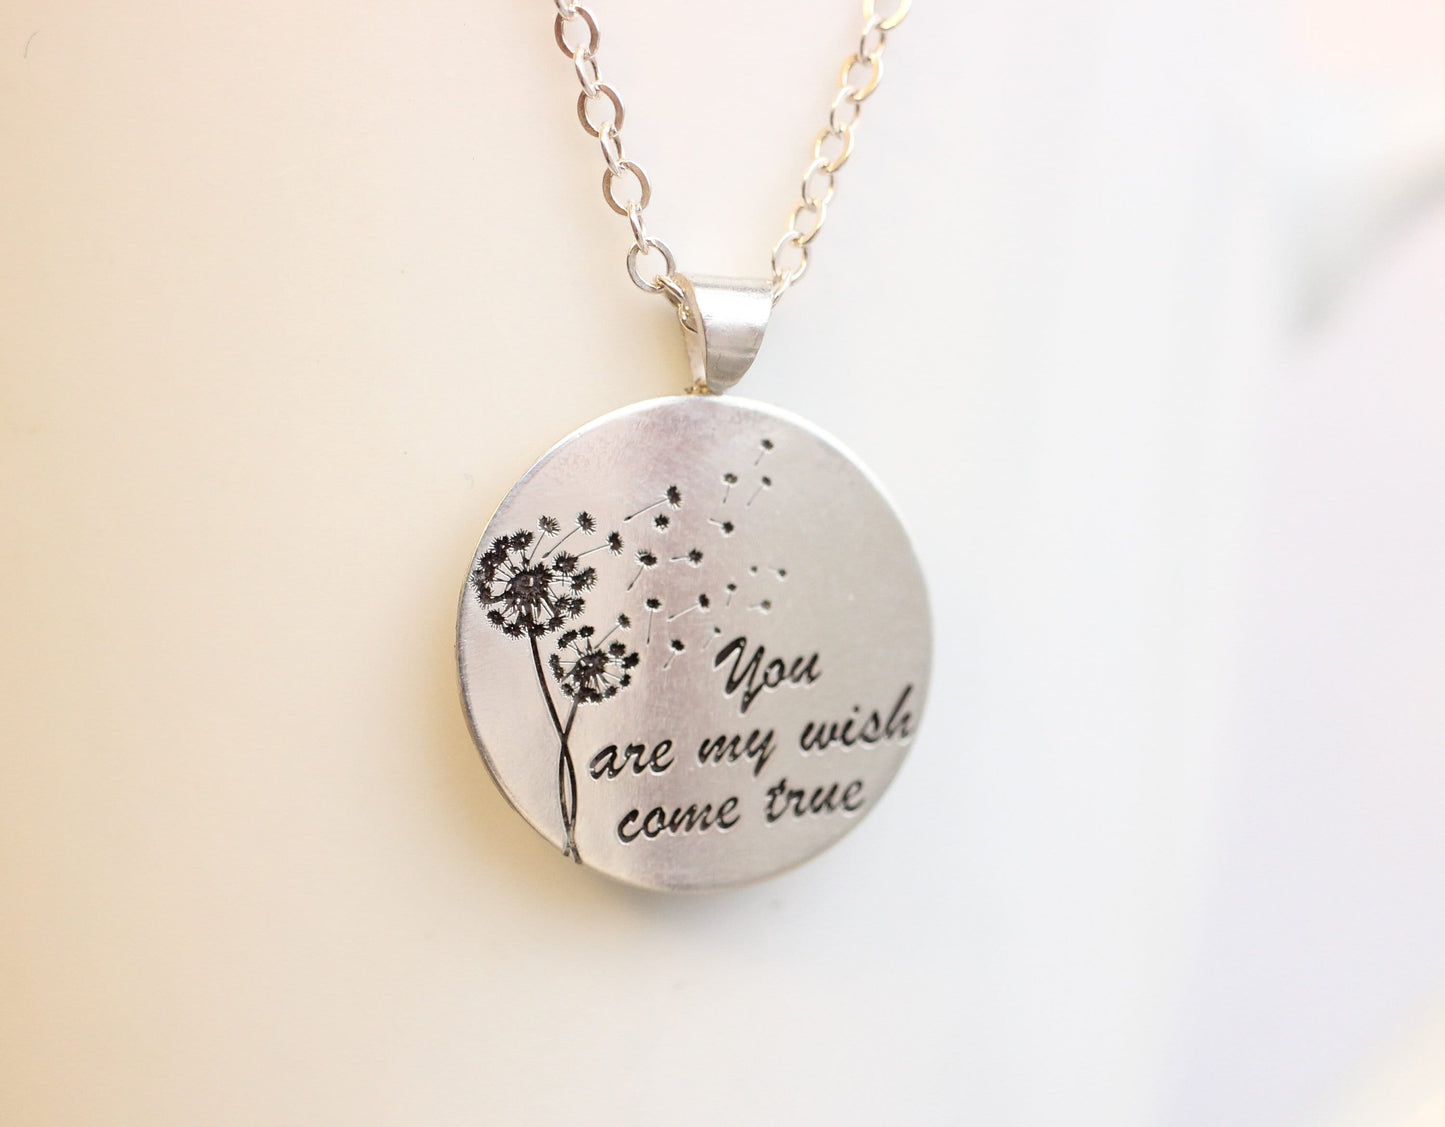 Dandelion Necklace // Personalized Sterling Silver Necklace - Custom Engraved Wish Necklace Valentine's Day Gift - You Are My Wish Come True